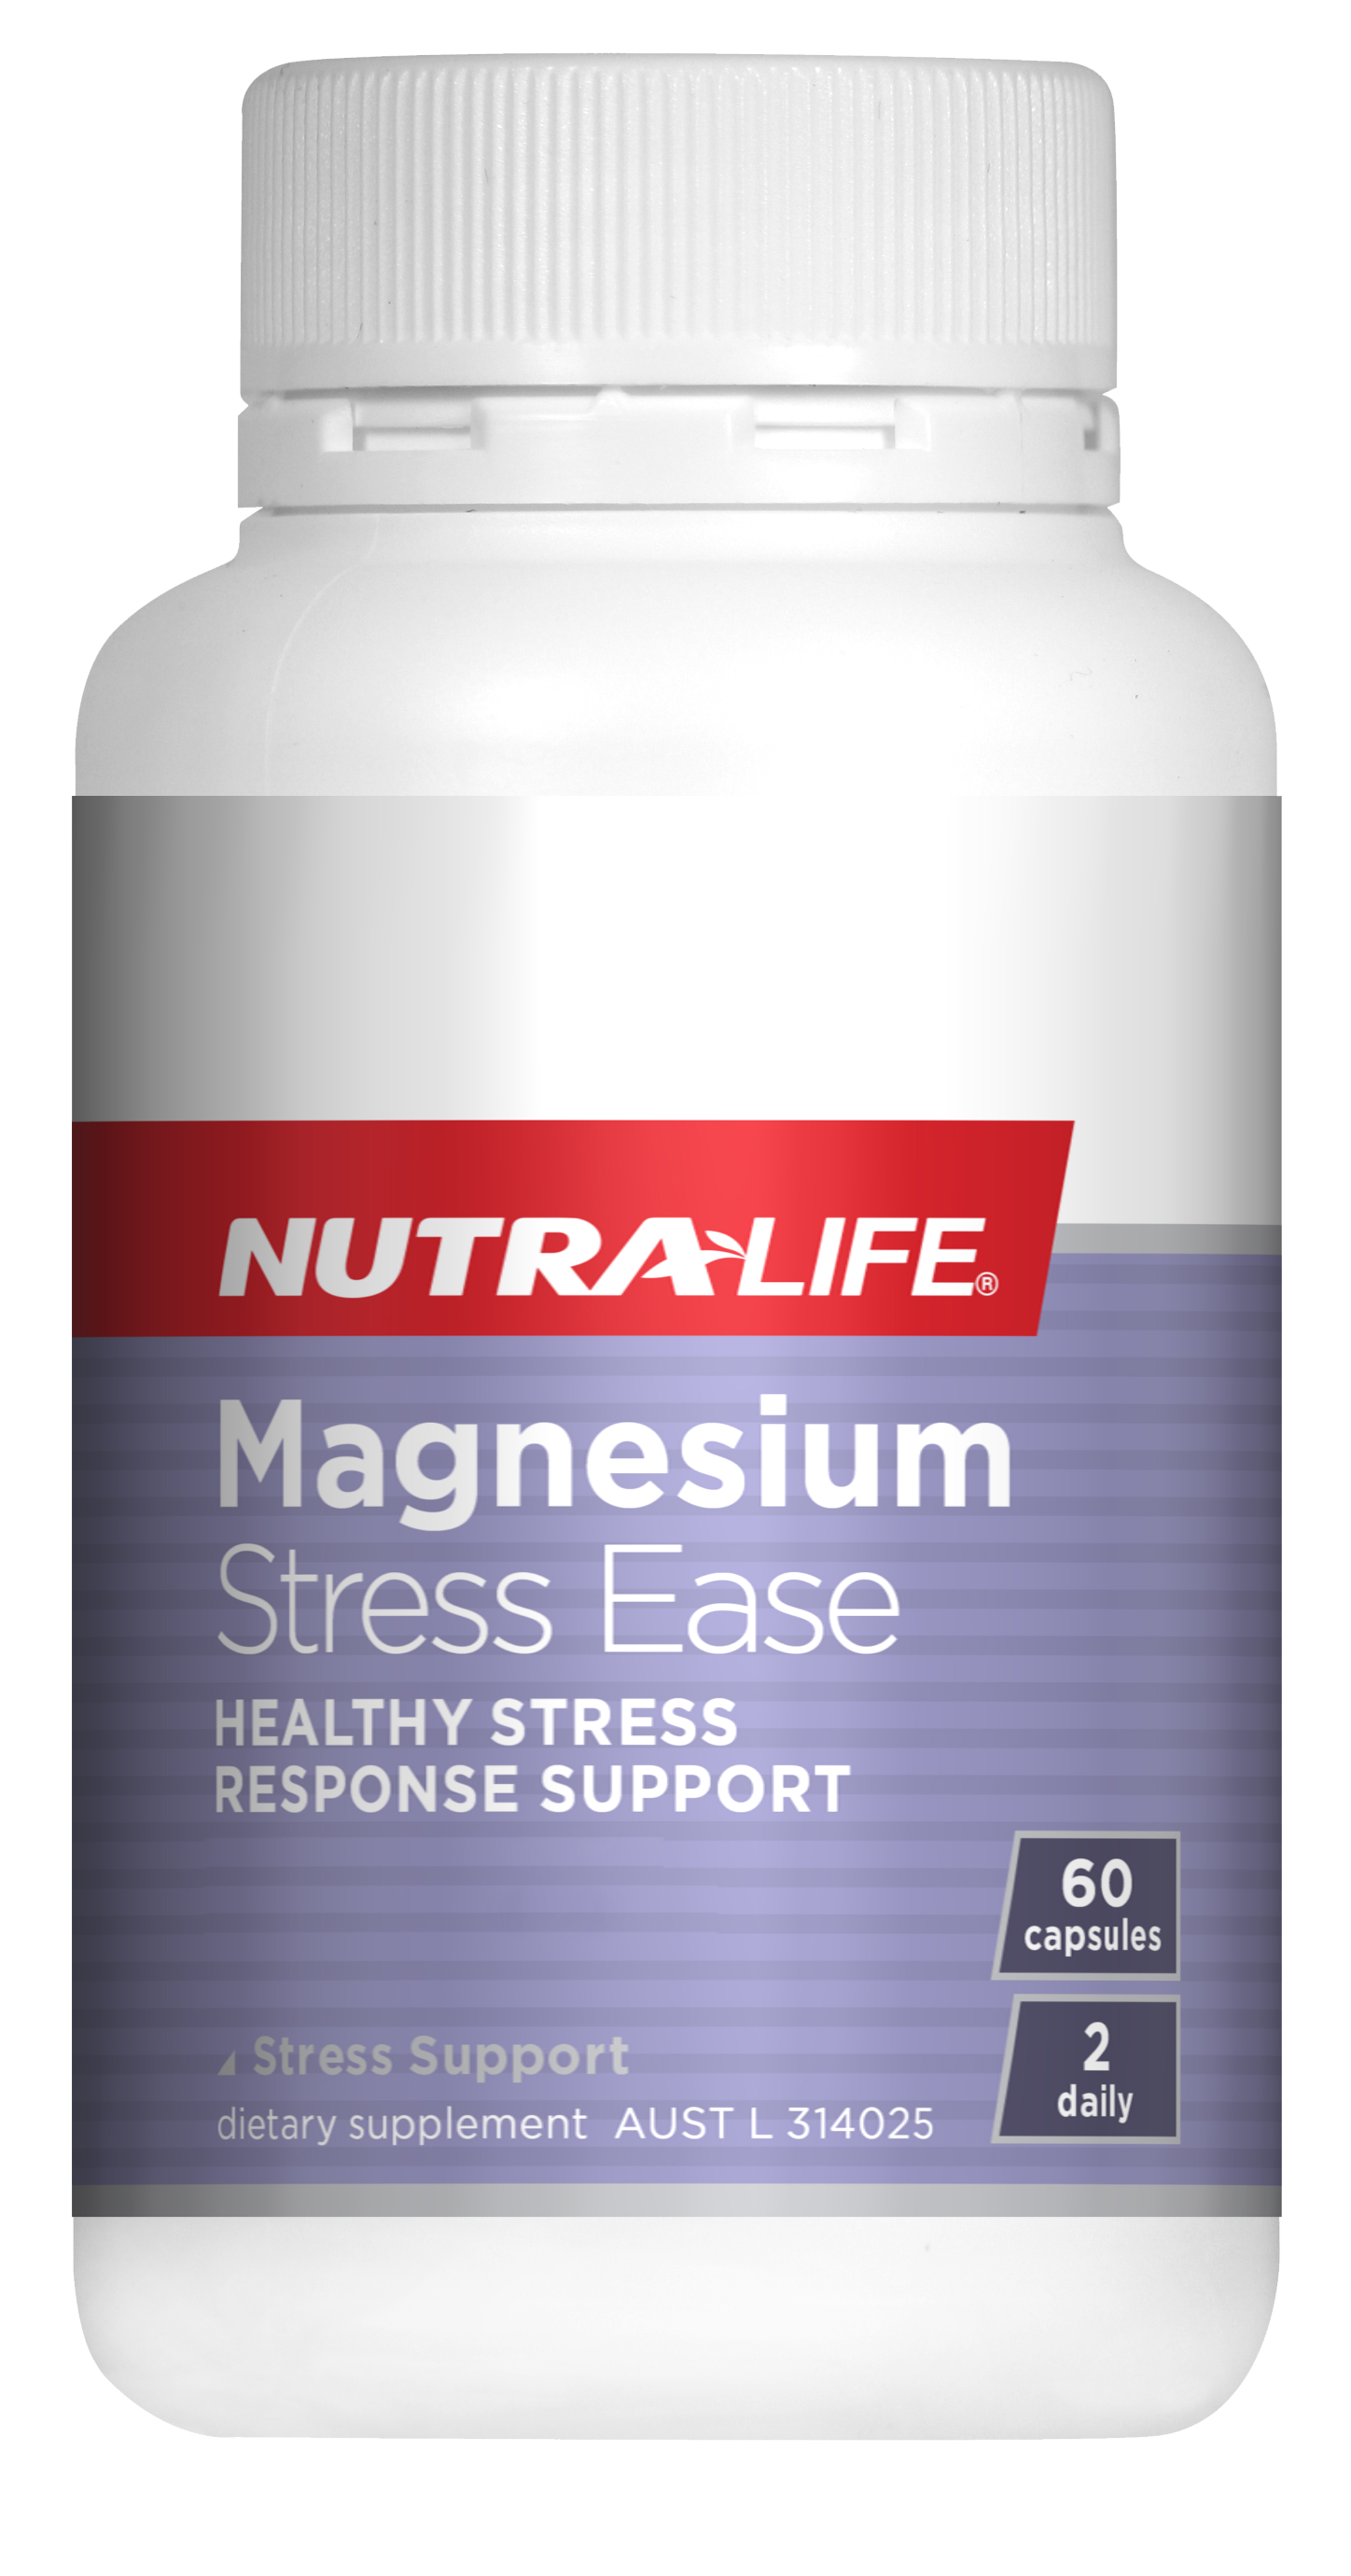 Nutra-Life Magnesium Stress Ease Capsules 60